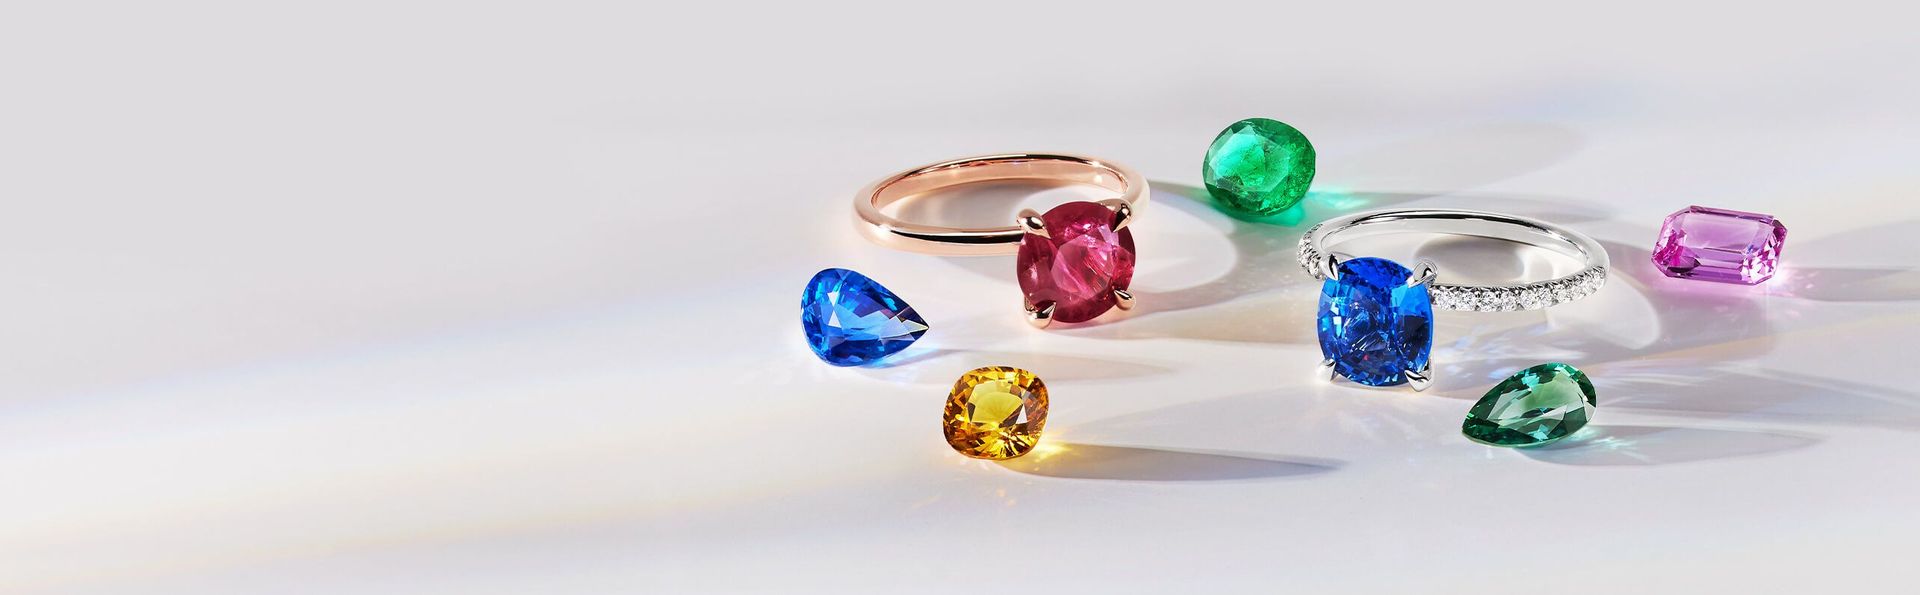 The Complete Guide to Men's Gemstone Rings